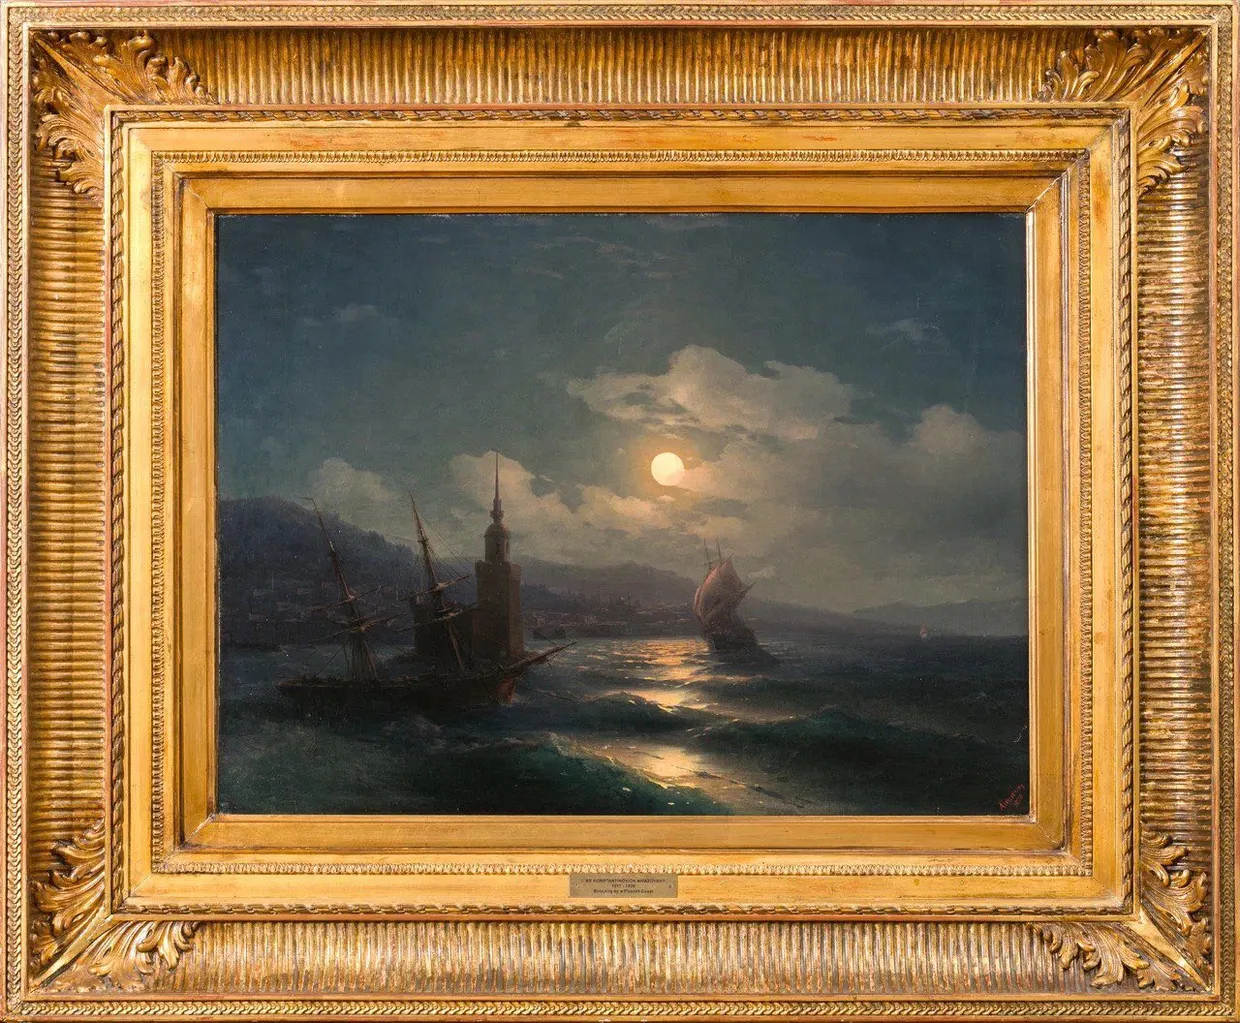 Moonlit Night by Ivan Aivazovsky stolen during the Russian occupation of Crimea